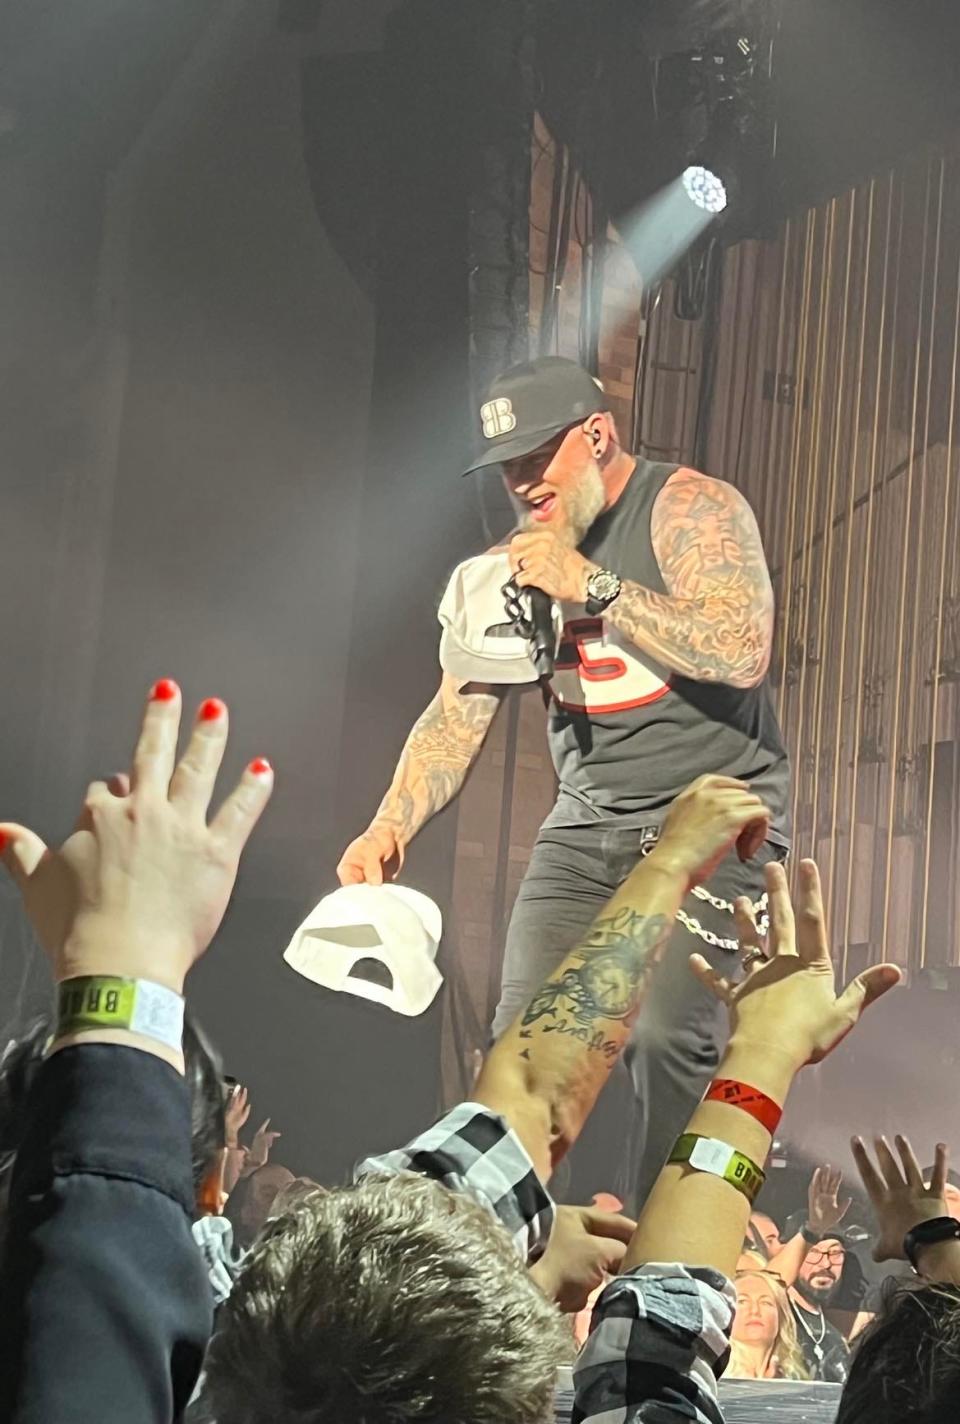 Country music artist Brantley Gilbert hands out hats to fans at Thursday night's concert at the Canton Memorial Civic Center.